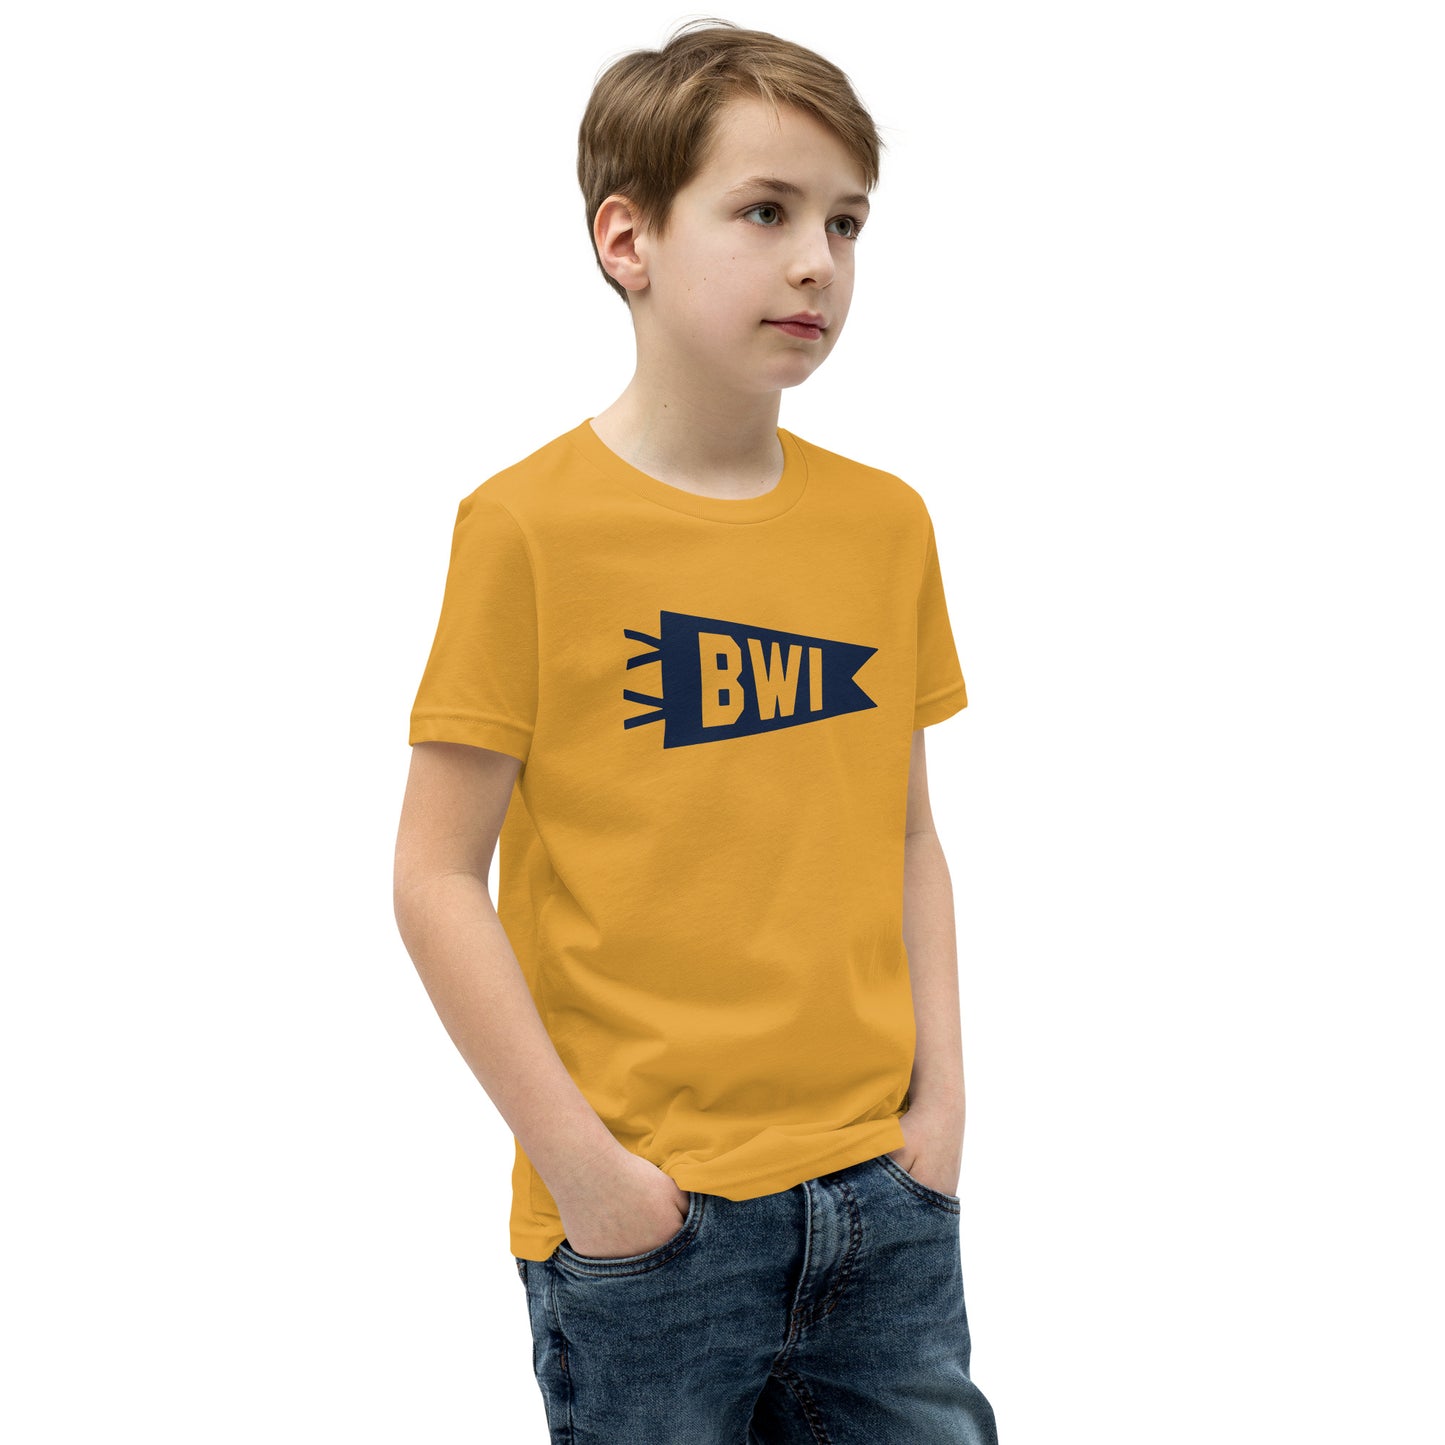 Kid's Airport Code Tee - Navy Blue Graphic • BWI Baltimore • YHM Designs - Image 07